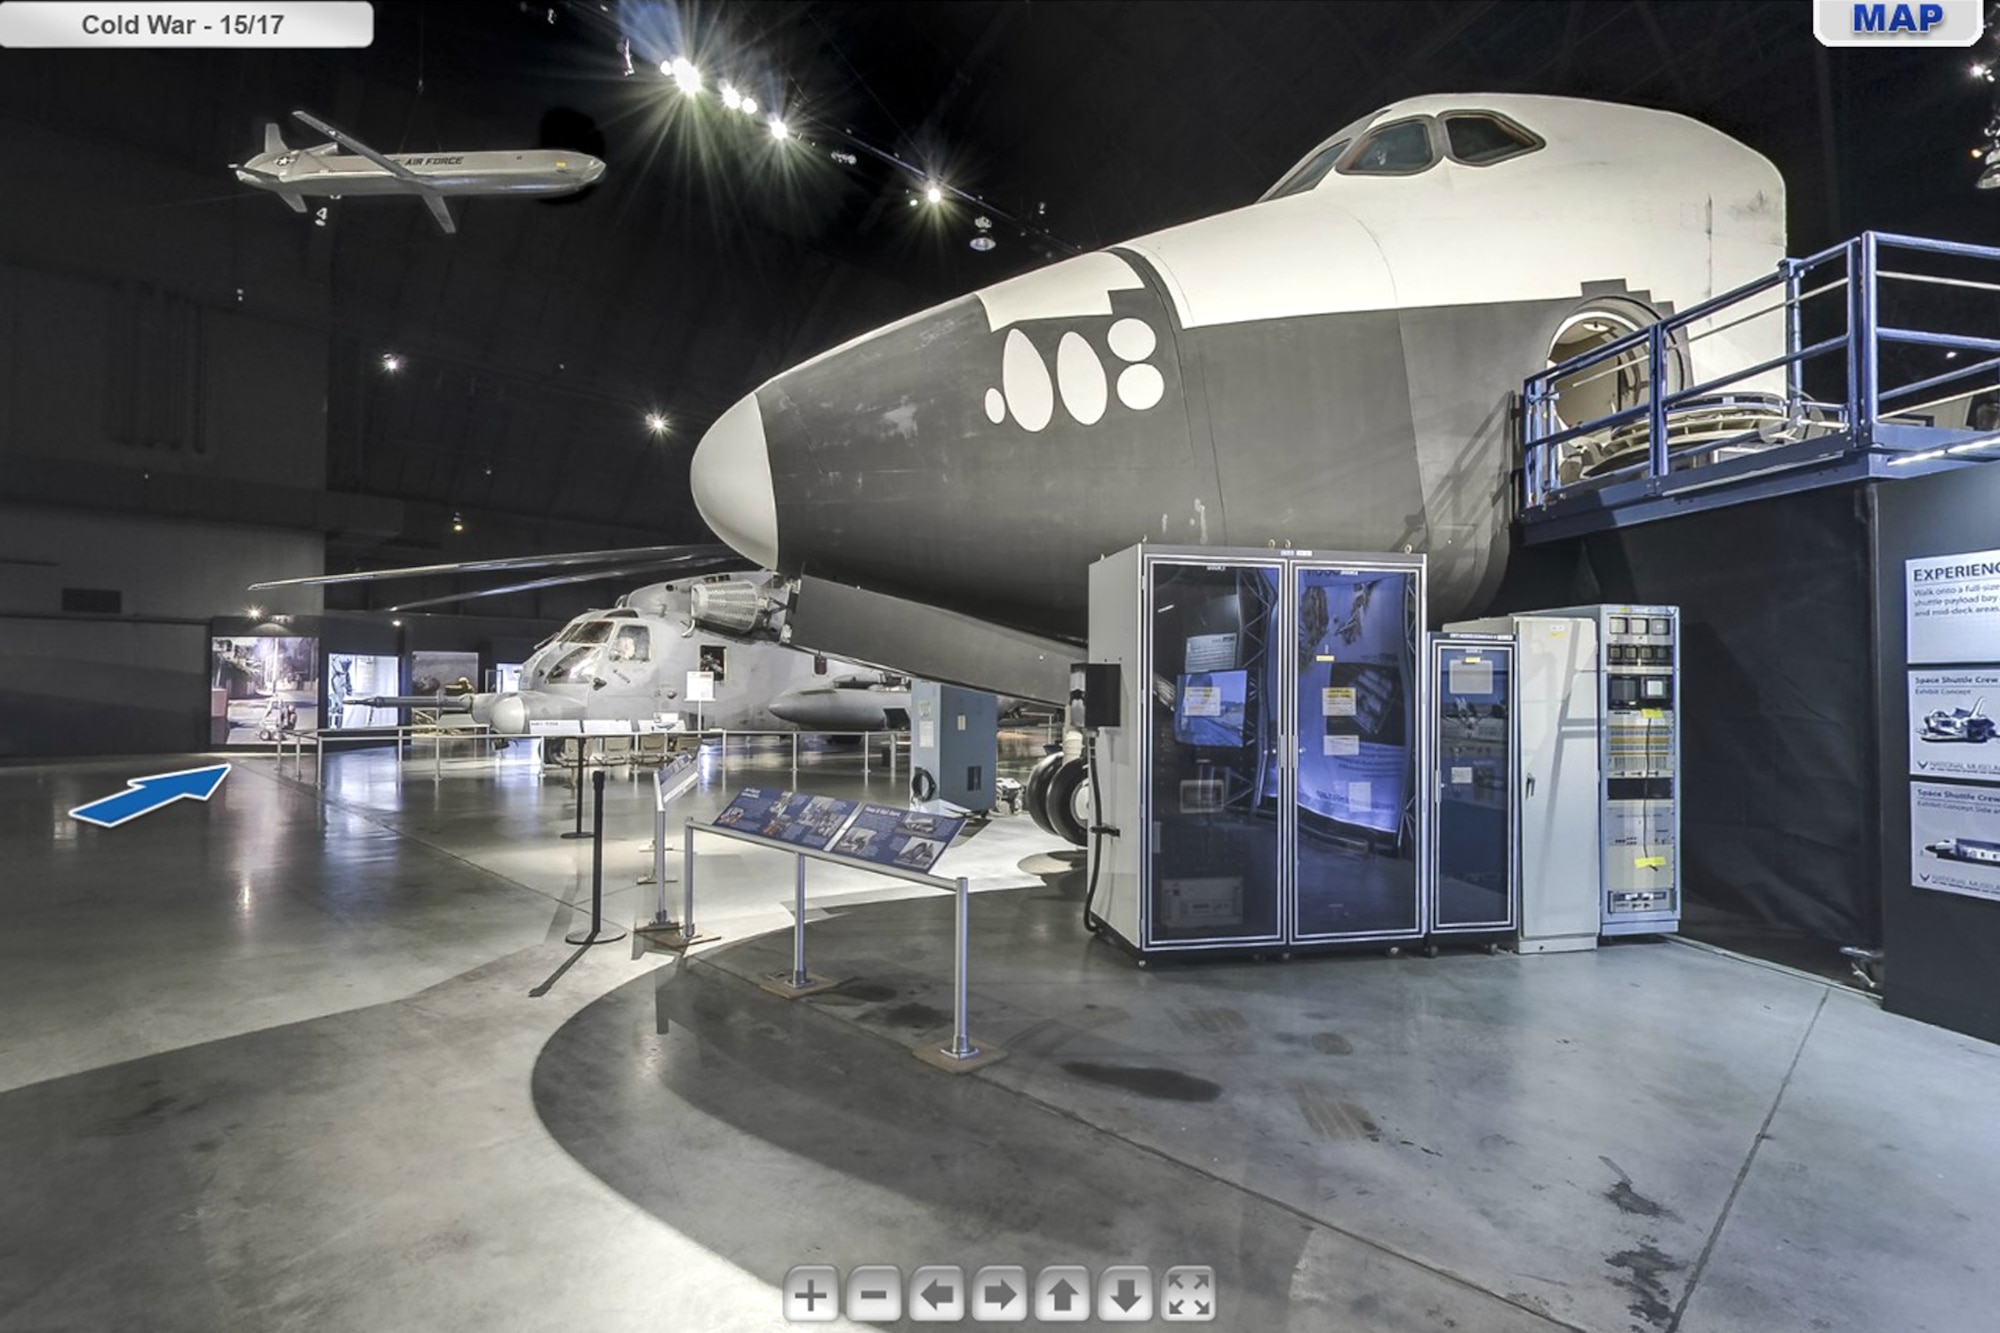 Screenshot of the Cold War Gallery from the National Museum of the U.S. Air Force's Virtual Tour website. (U.S. Air Force image).